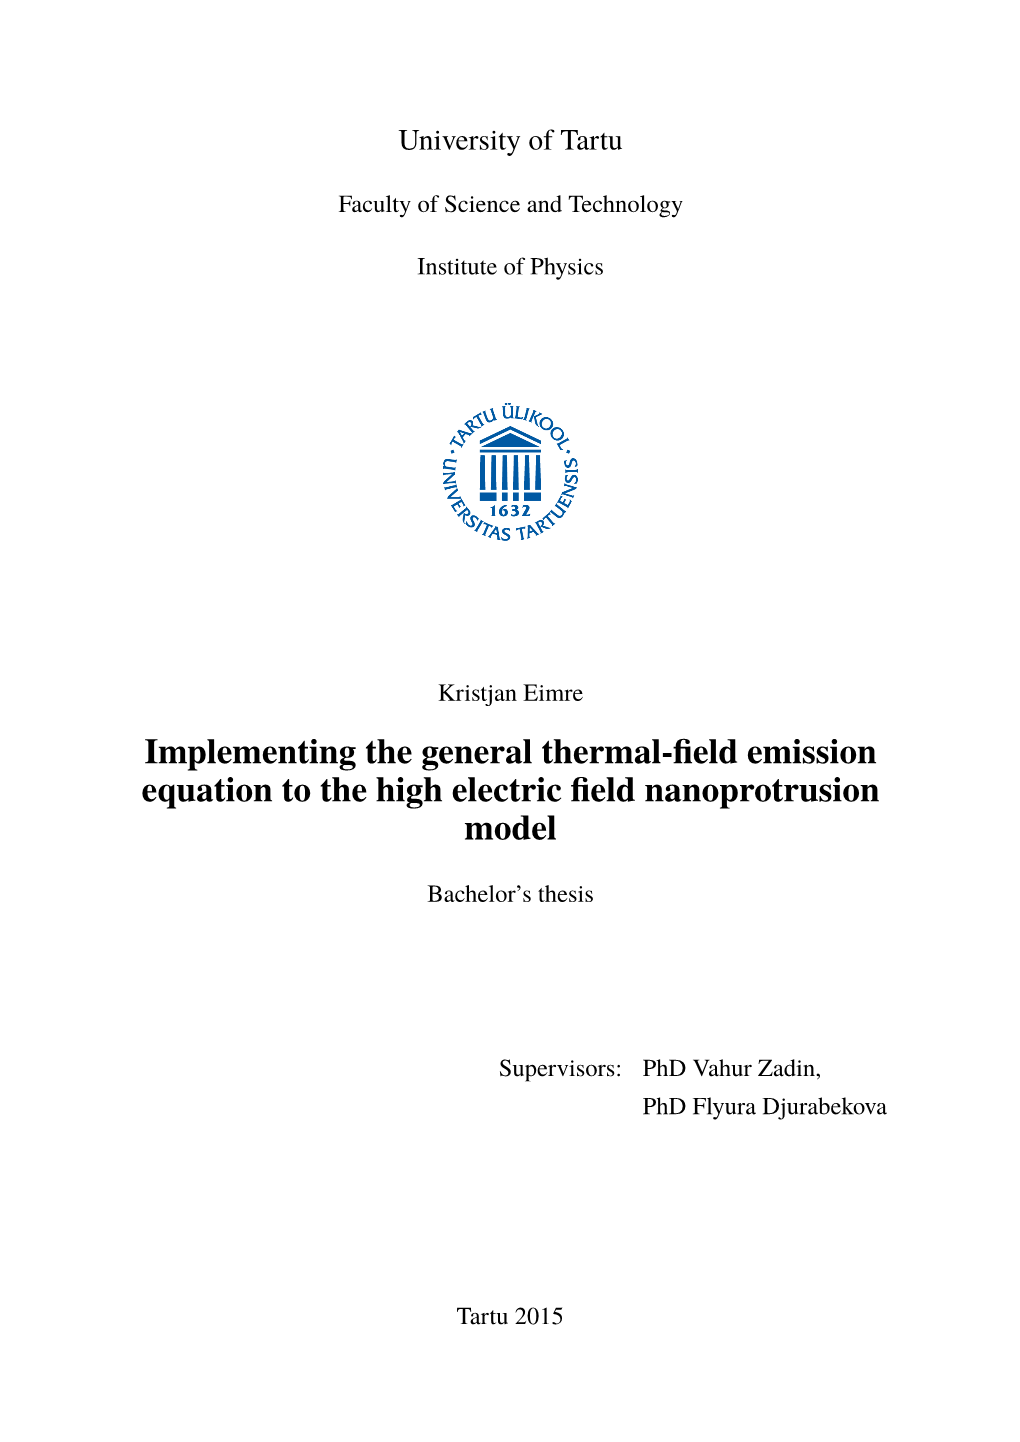 Implementing the General Thermal-Field Emission Equation To